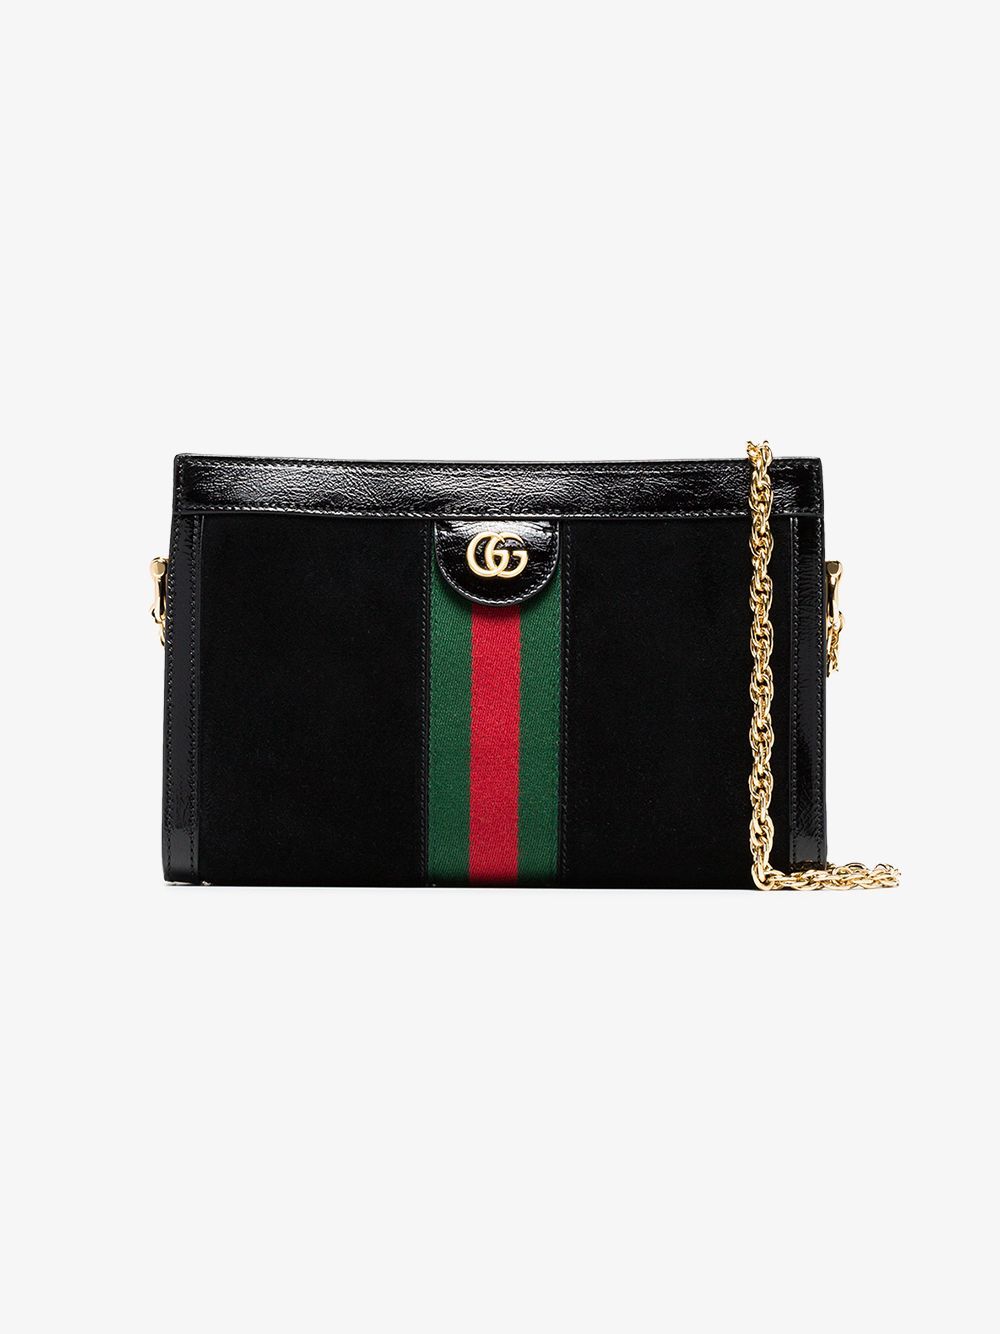 Gucci Ophidia small shoulder bag | Browns Fashion